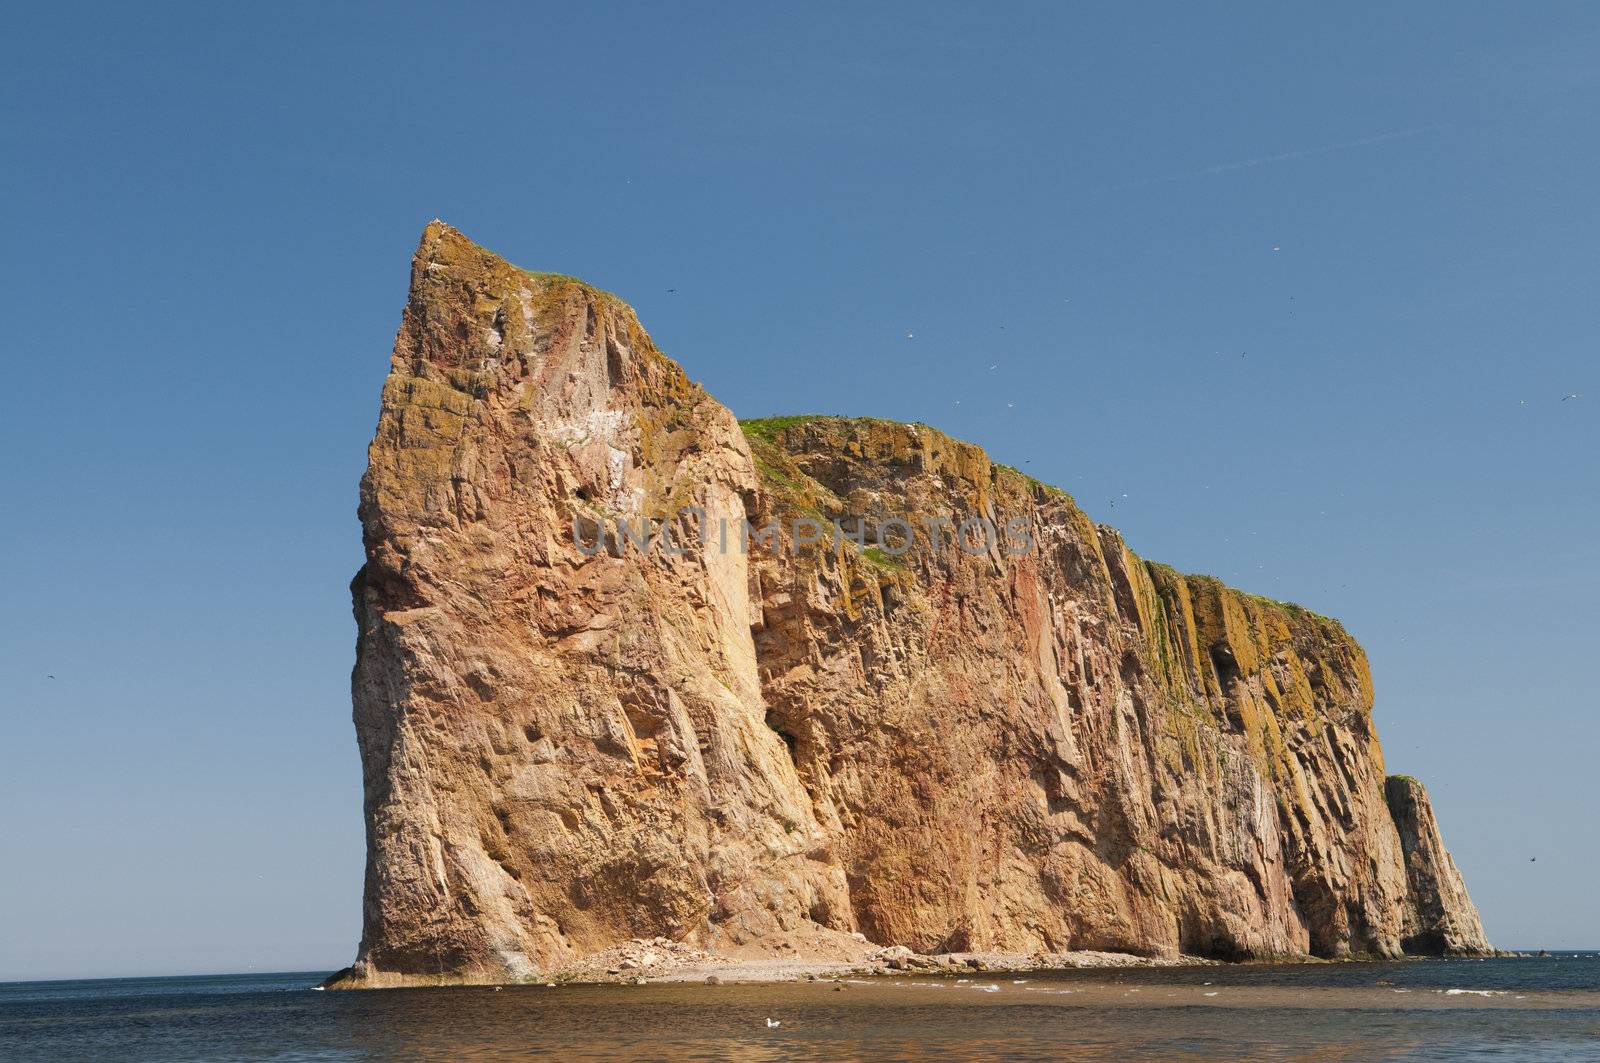 Looking up at the Perce Rock famous landmark located on the Gaspe Peninsula, Quebec, Canada